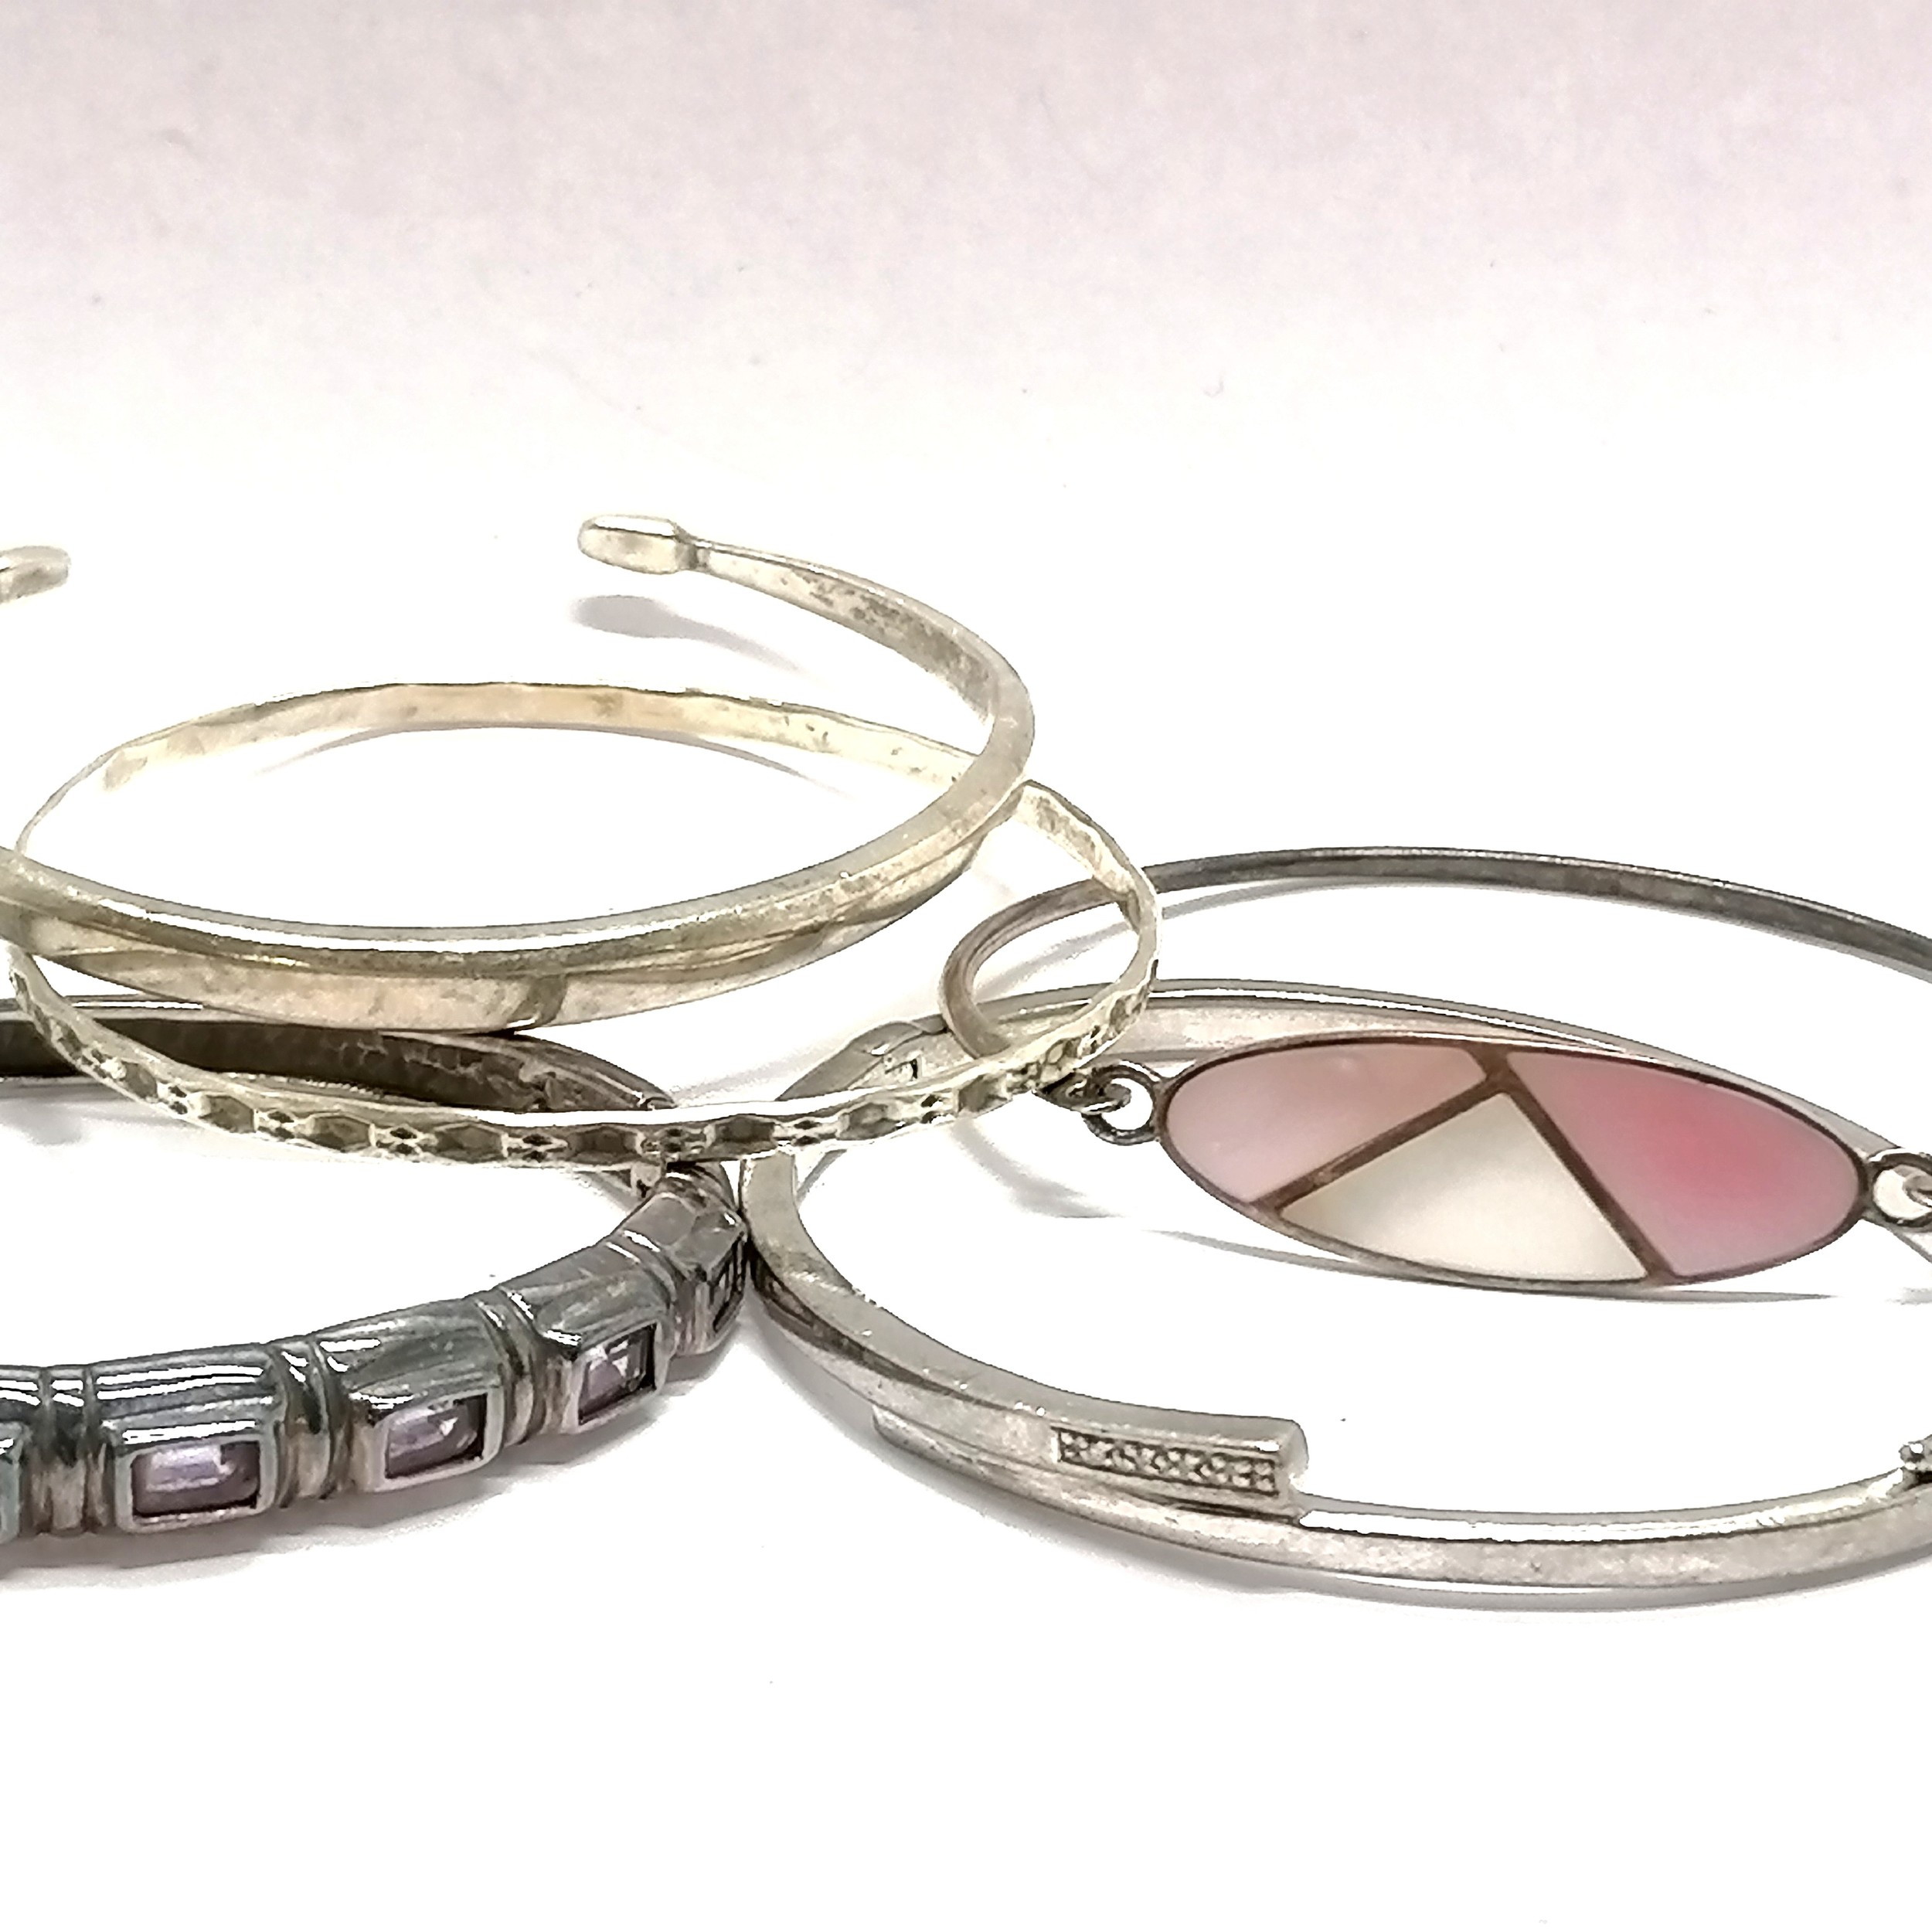 5 x silver marked bangles inc diamond set, amethyst, mother of pearl etc - total weight 66g - SOLD - Image 2 of 2